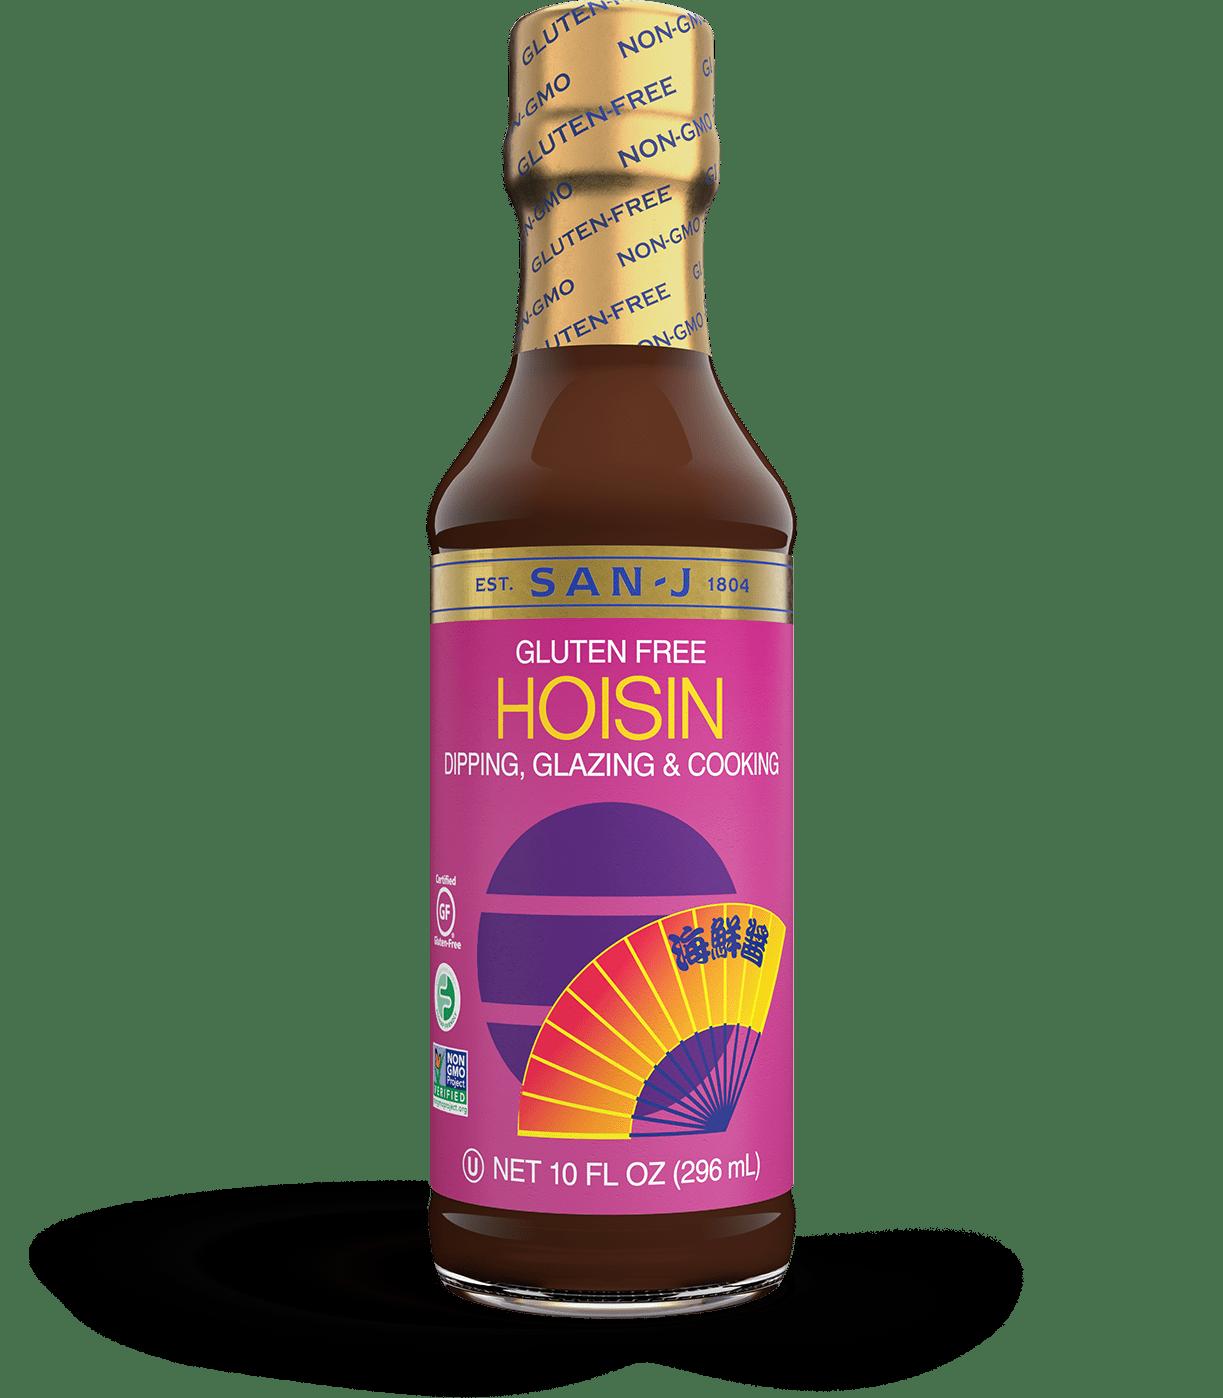  This hoisin sauce recipe is perfect for anyone with gluten sensitivities.